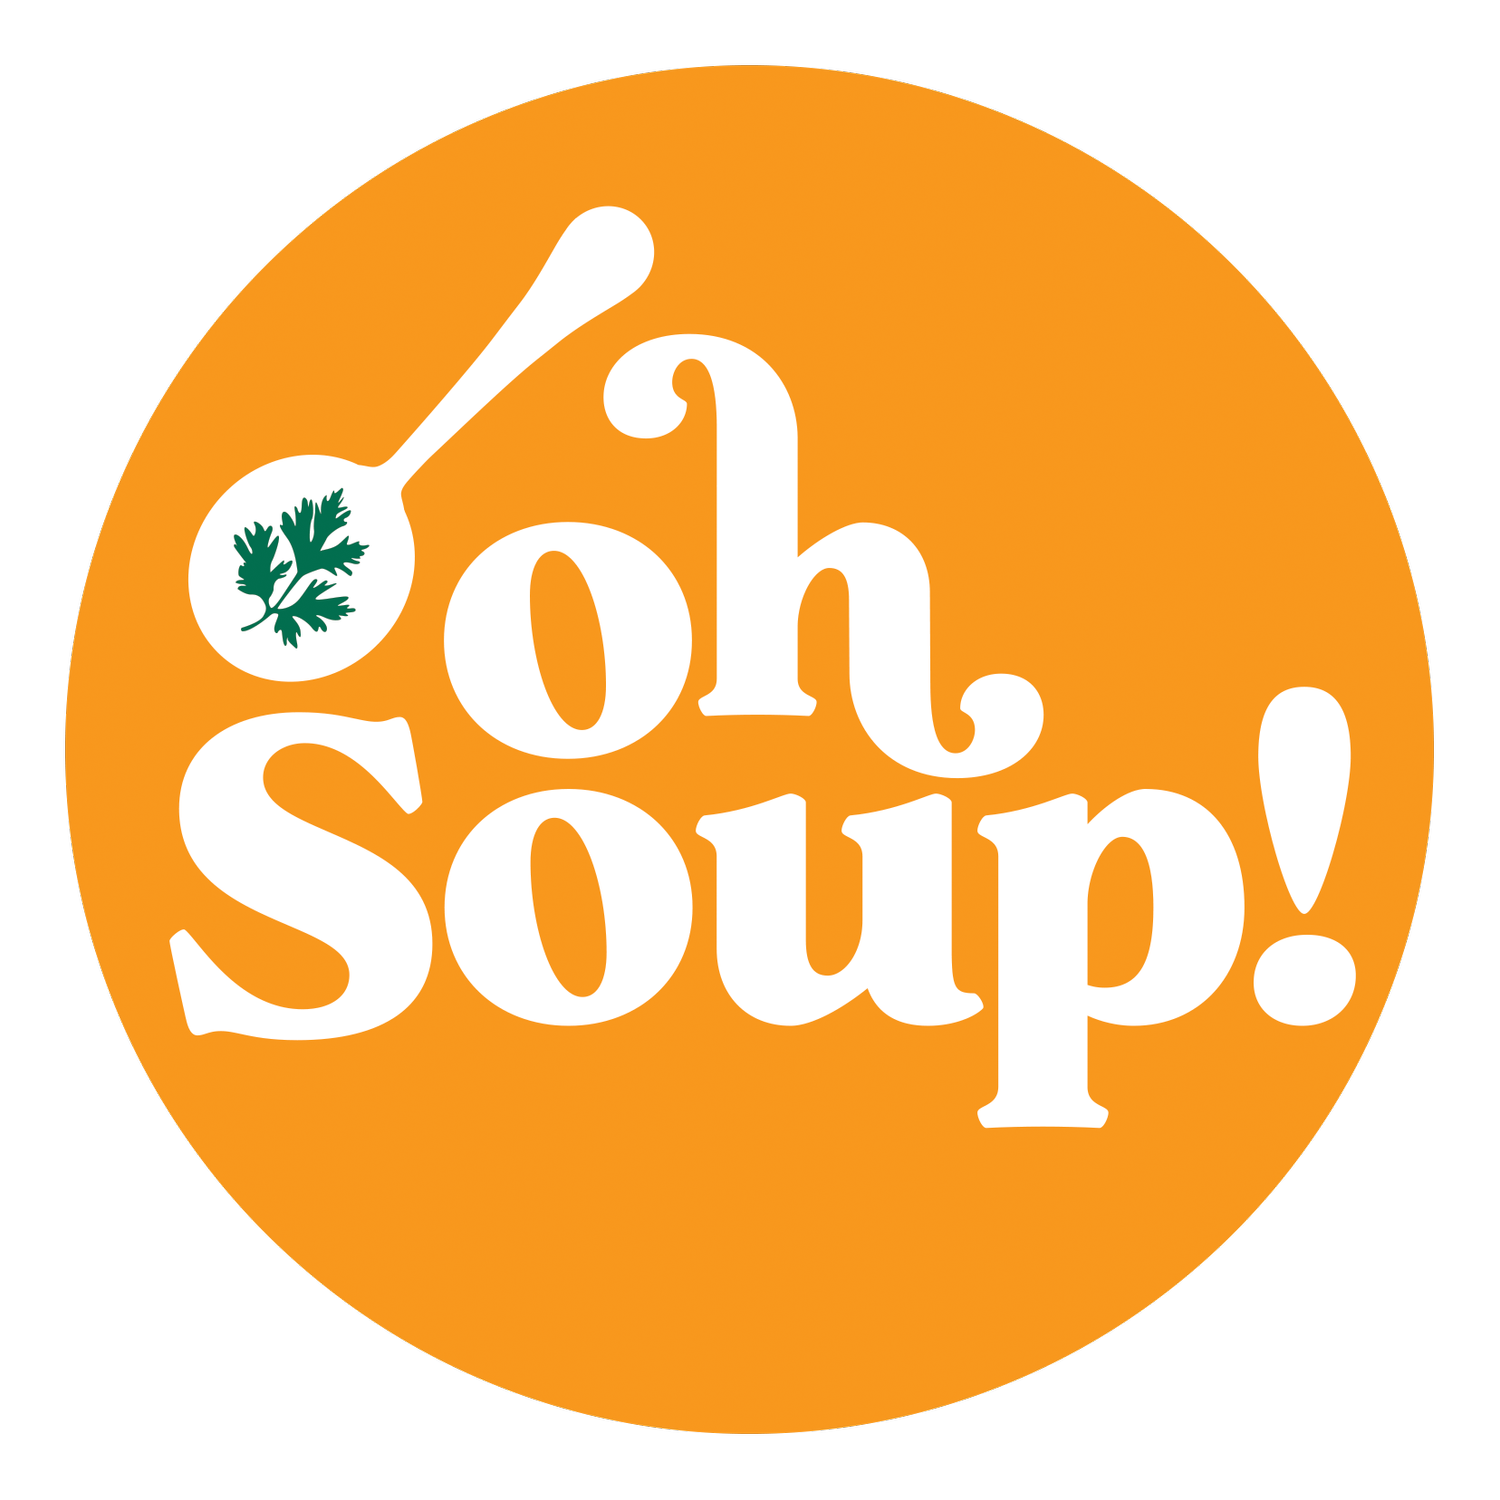 Oh Soup!